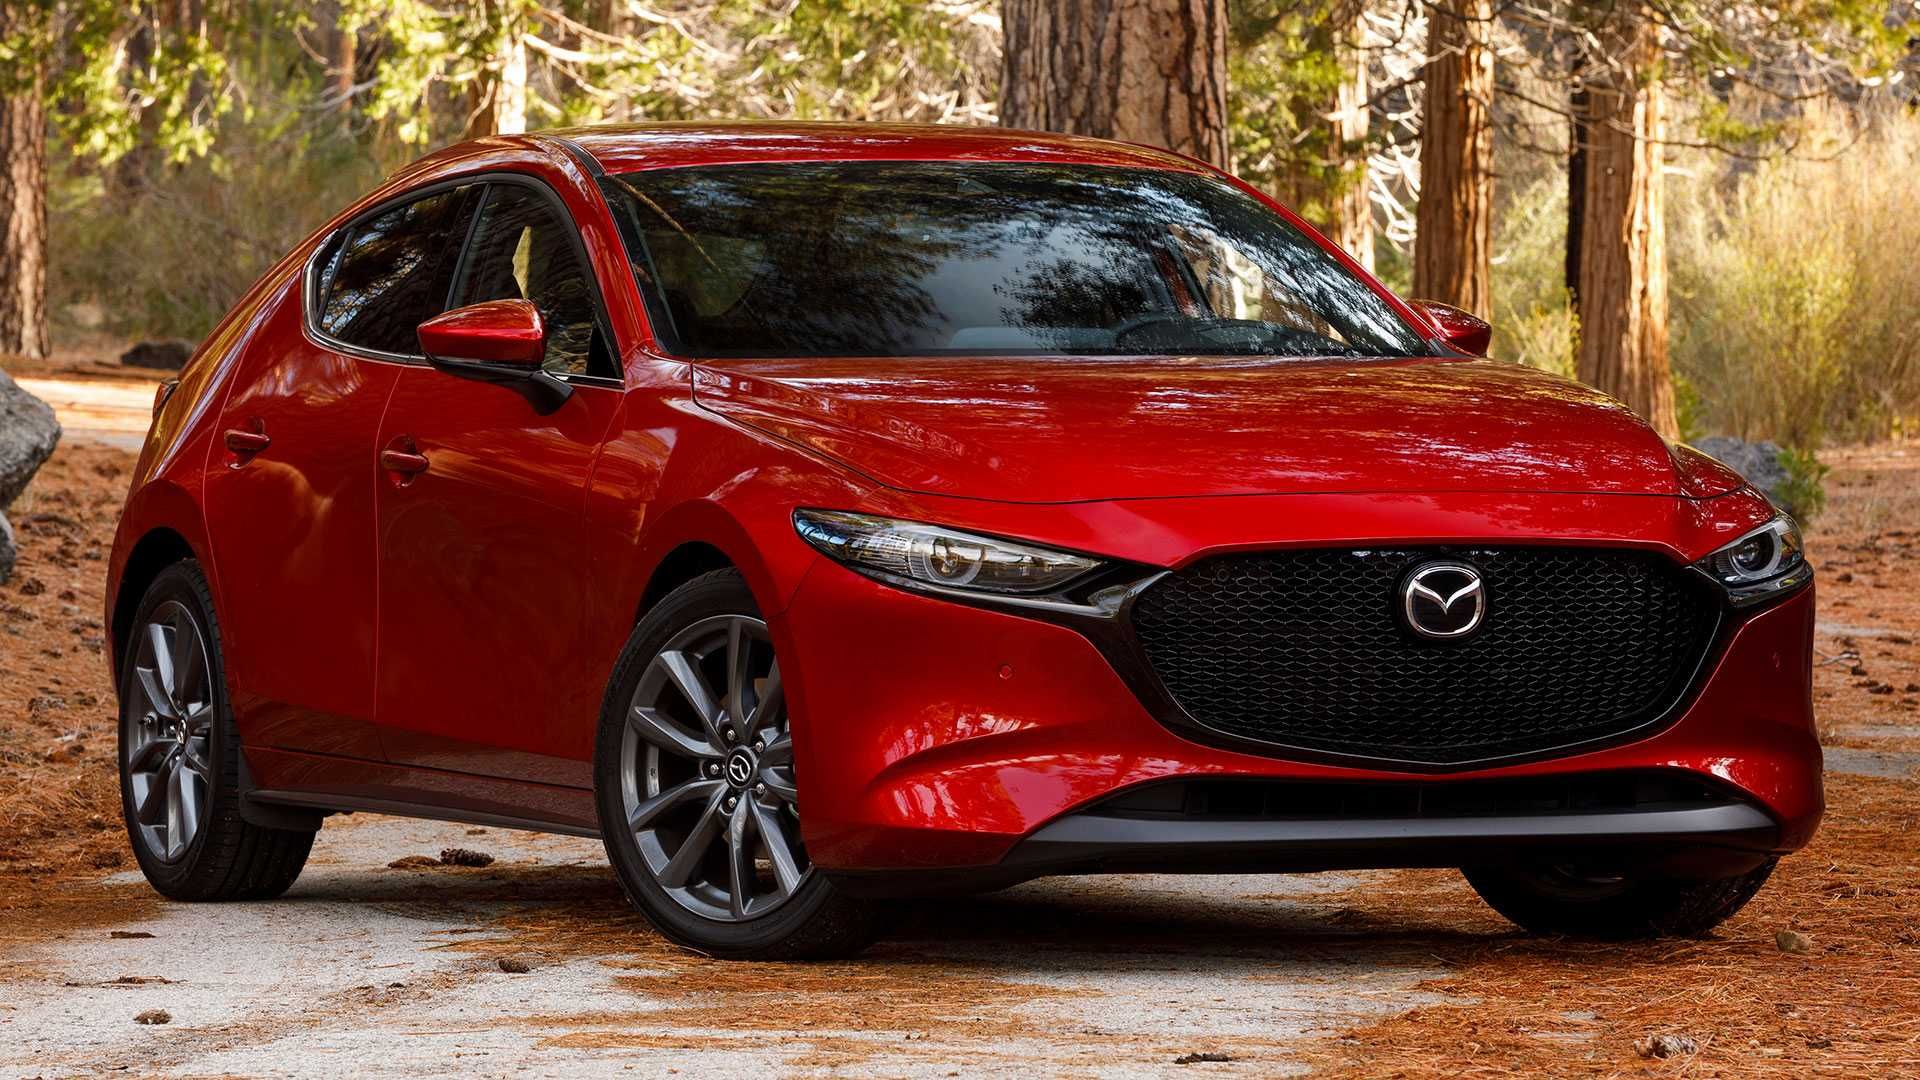 2019 Mazda 3 parked in the woods